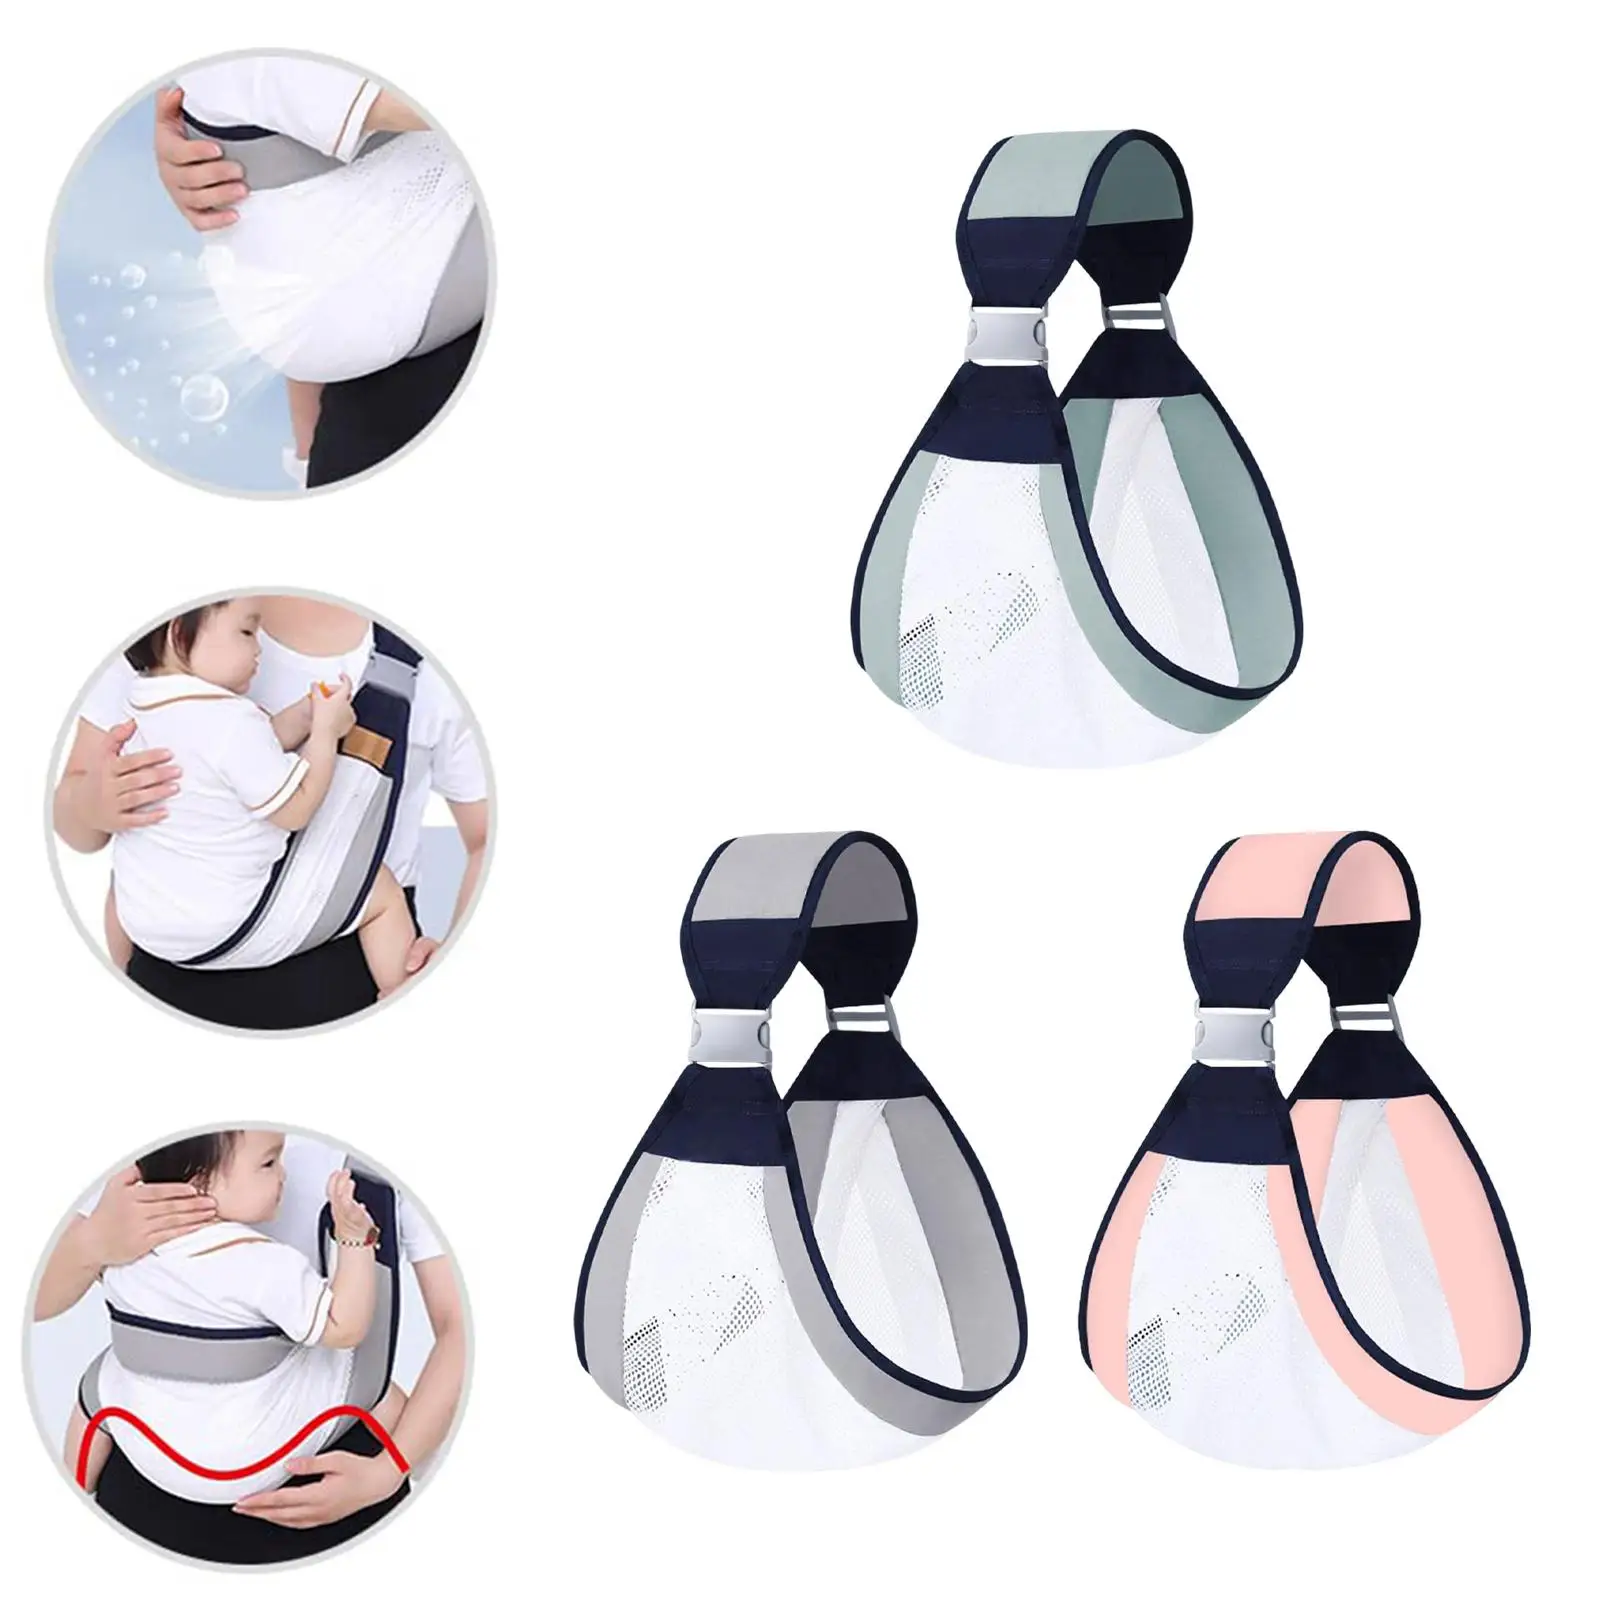 Baby Carrier Sling, Baby Holder Straps, Infant Nursing Cover Carrier with Clip, Infant Sling up to 20kg 4-36 Months Baby